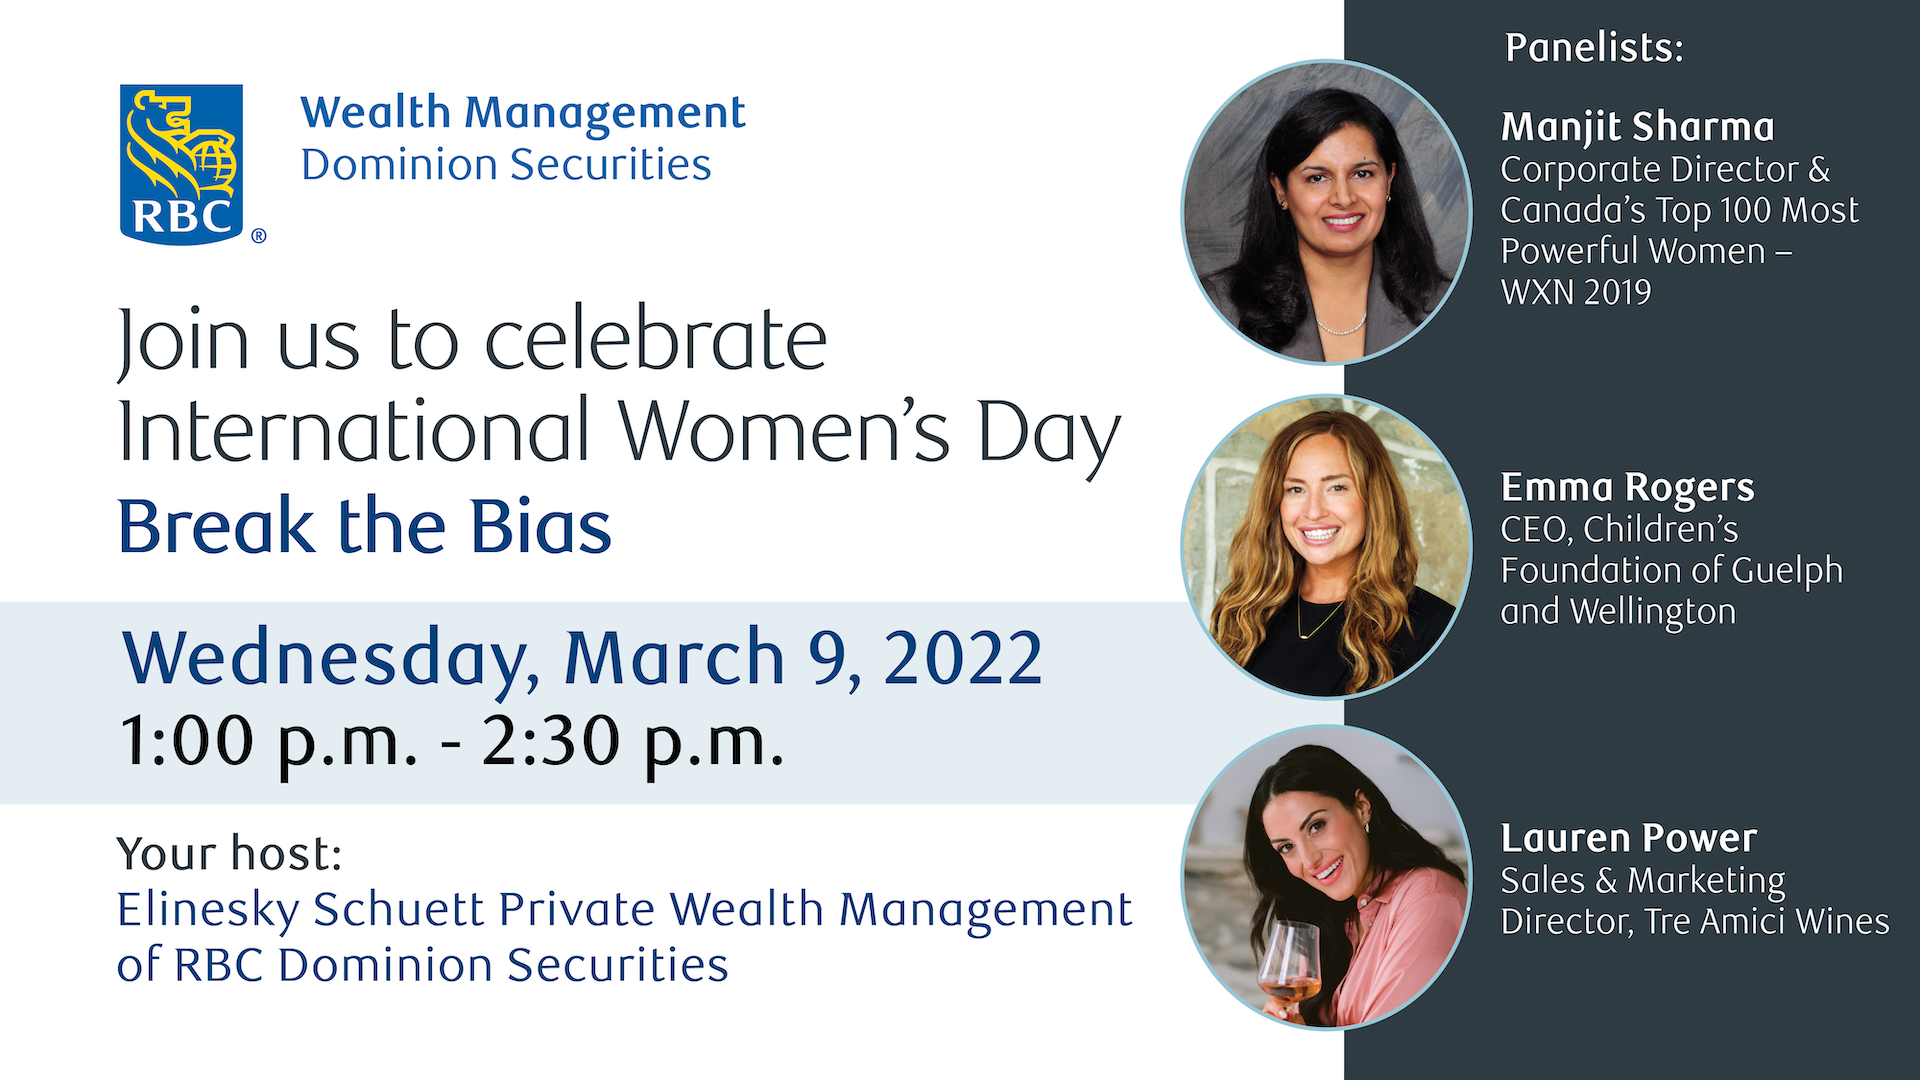 International Women's Day event promotion, including date and time information, and photos of the three panelists.